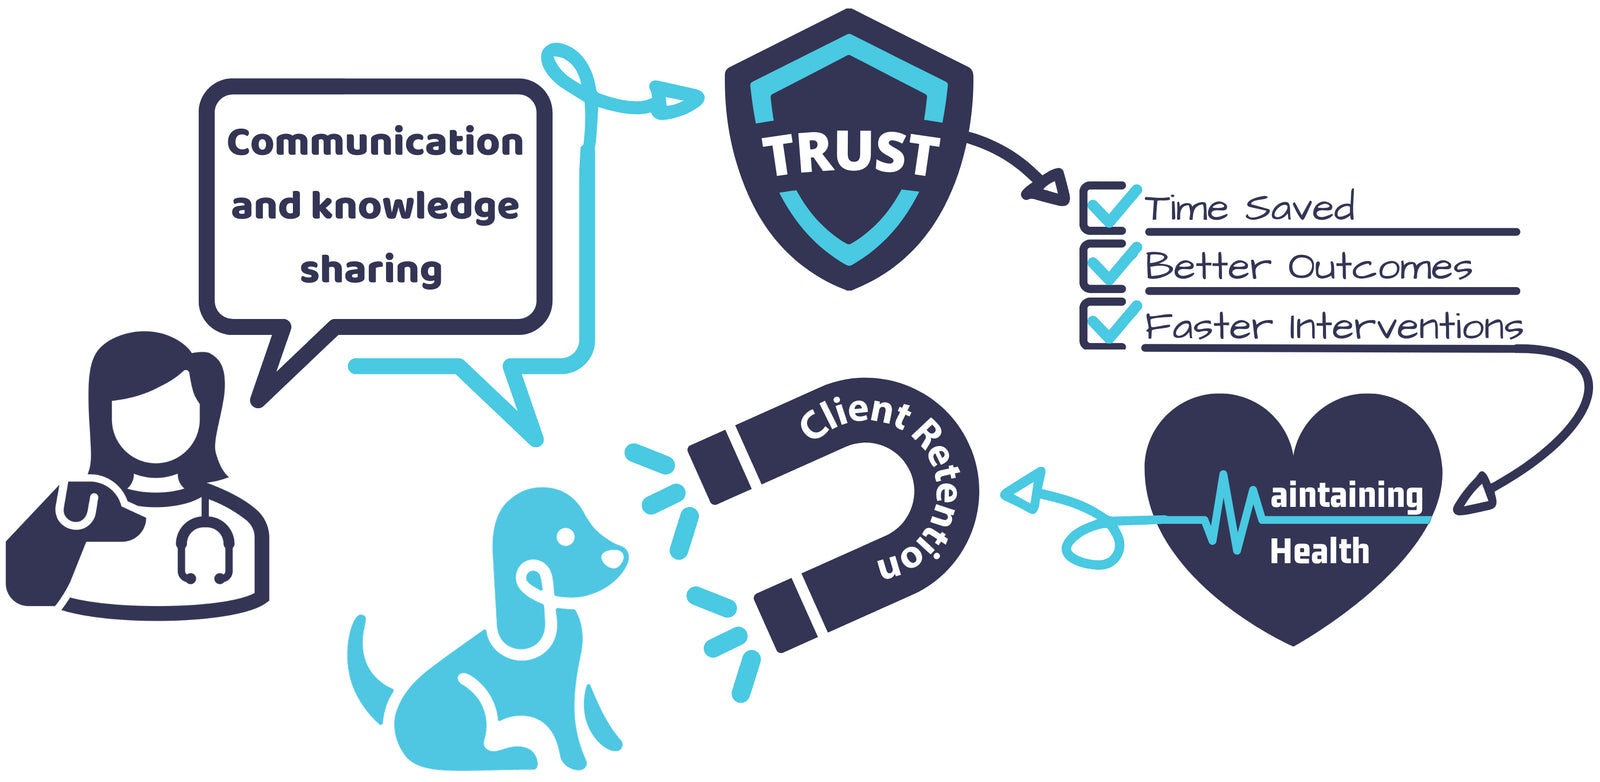 When veterinarians effectively communicate with clients and share their knowledge, they build trust that leads to time saved, better outcomes and faster interventions. Through this, pet health is maintained and veterinary client retention improves. 